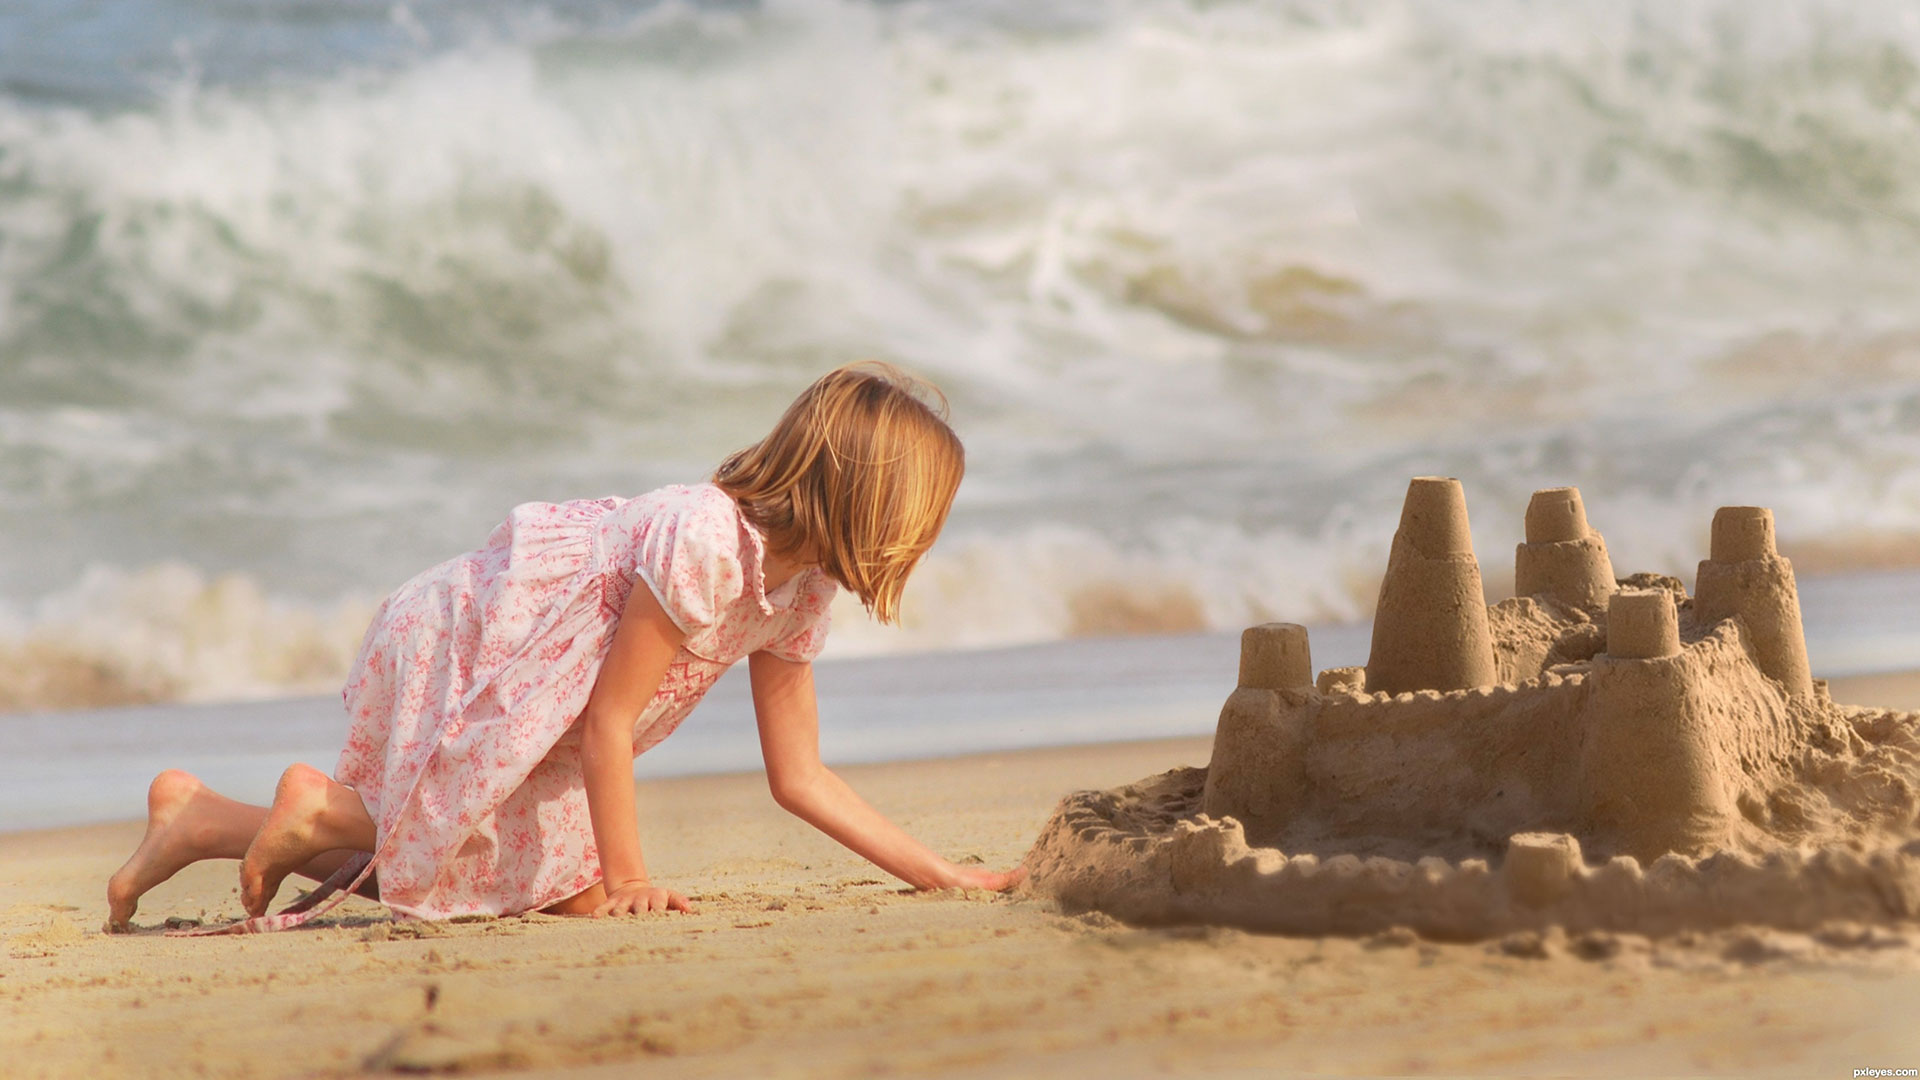 "Sandcastle" is a Photoshop composite image from three originals: a girl kneeling on beach sand, a large sandcastle, and rolling ocean waves in the background.